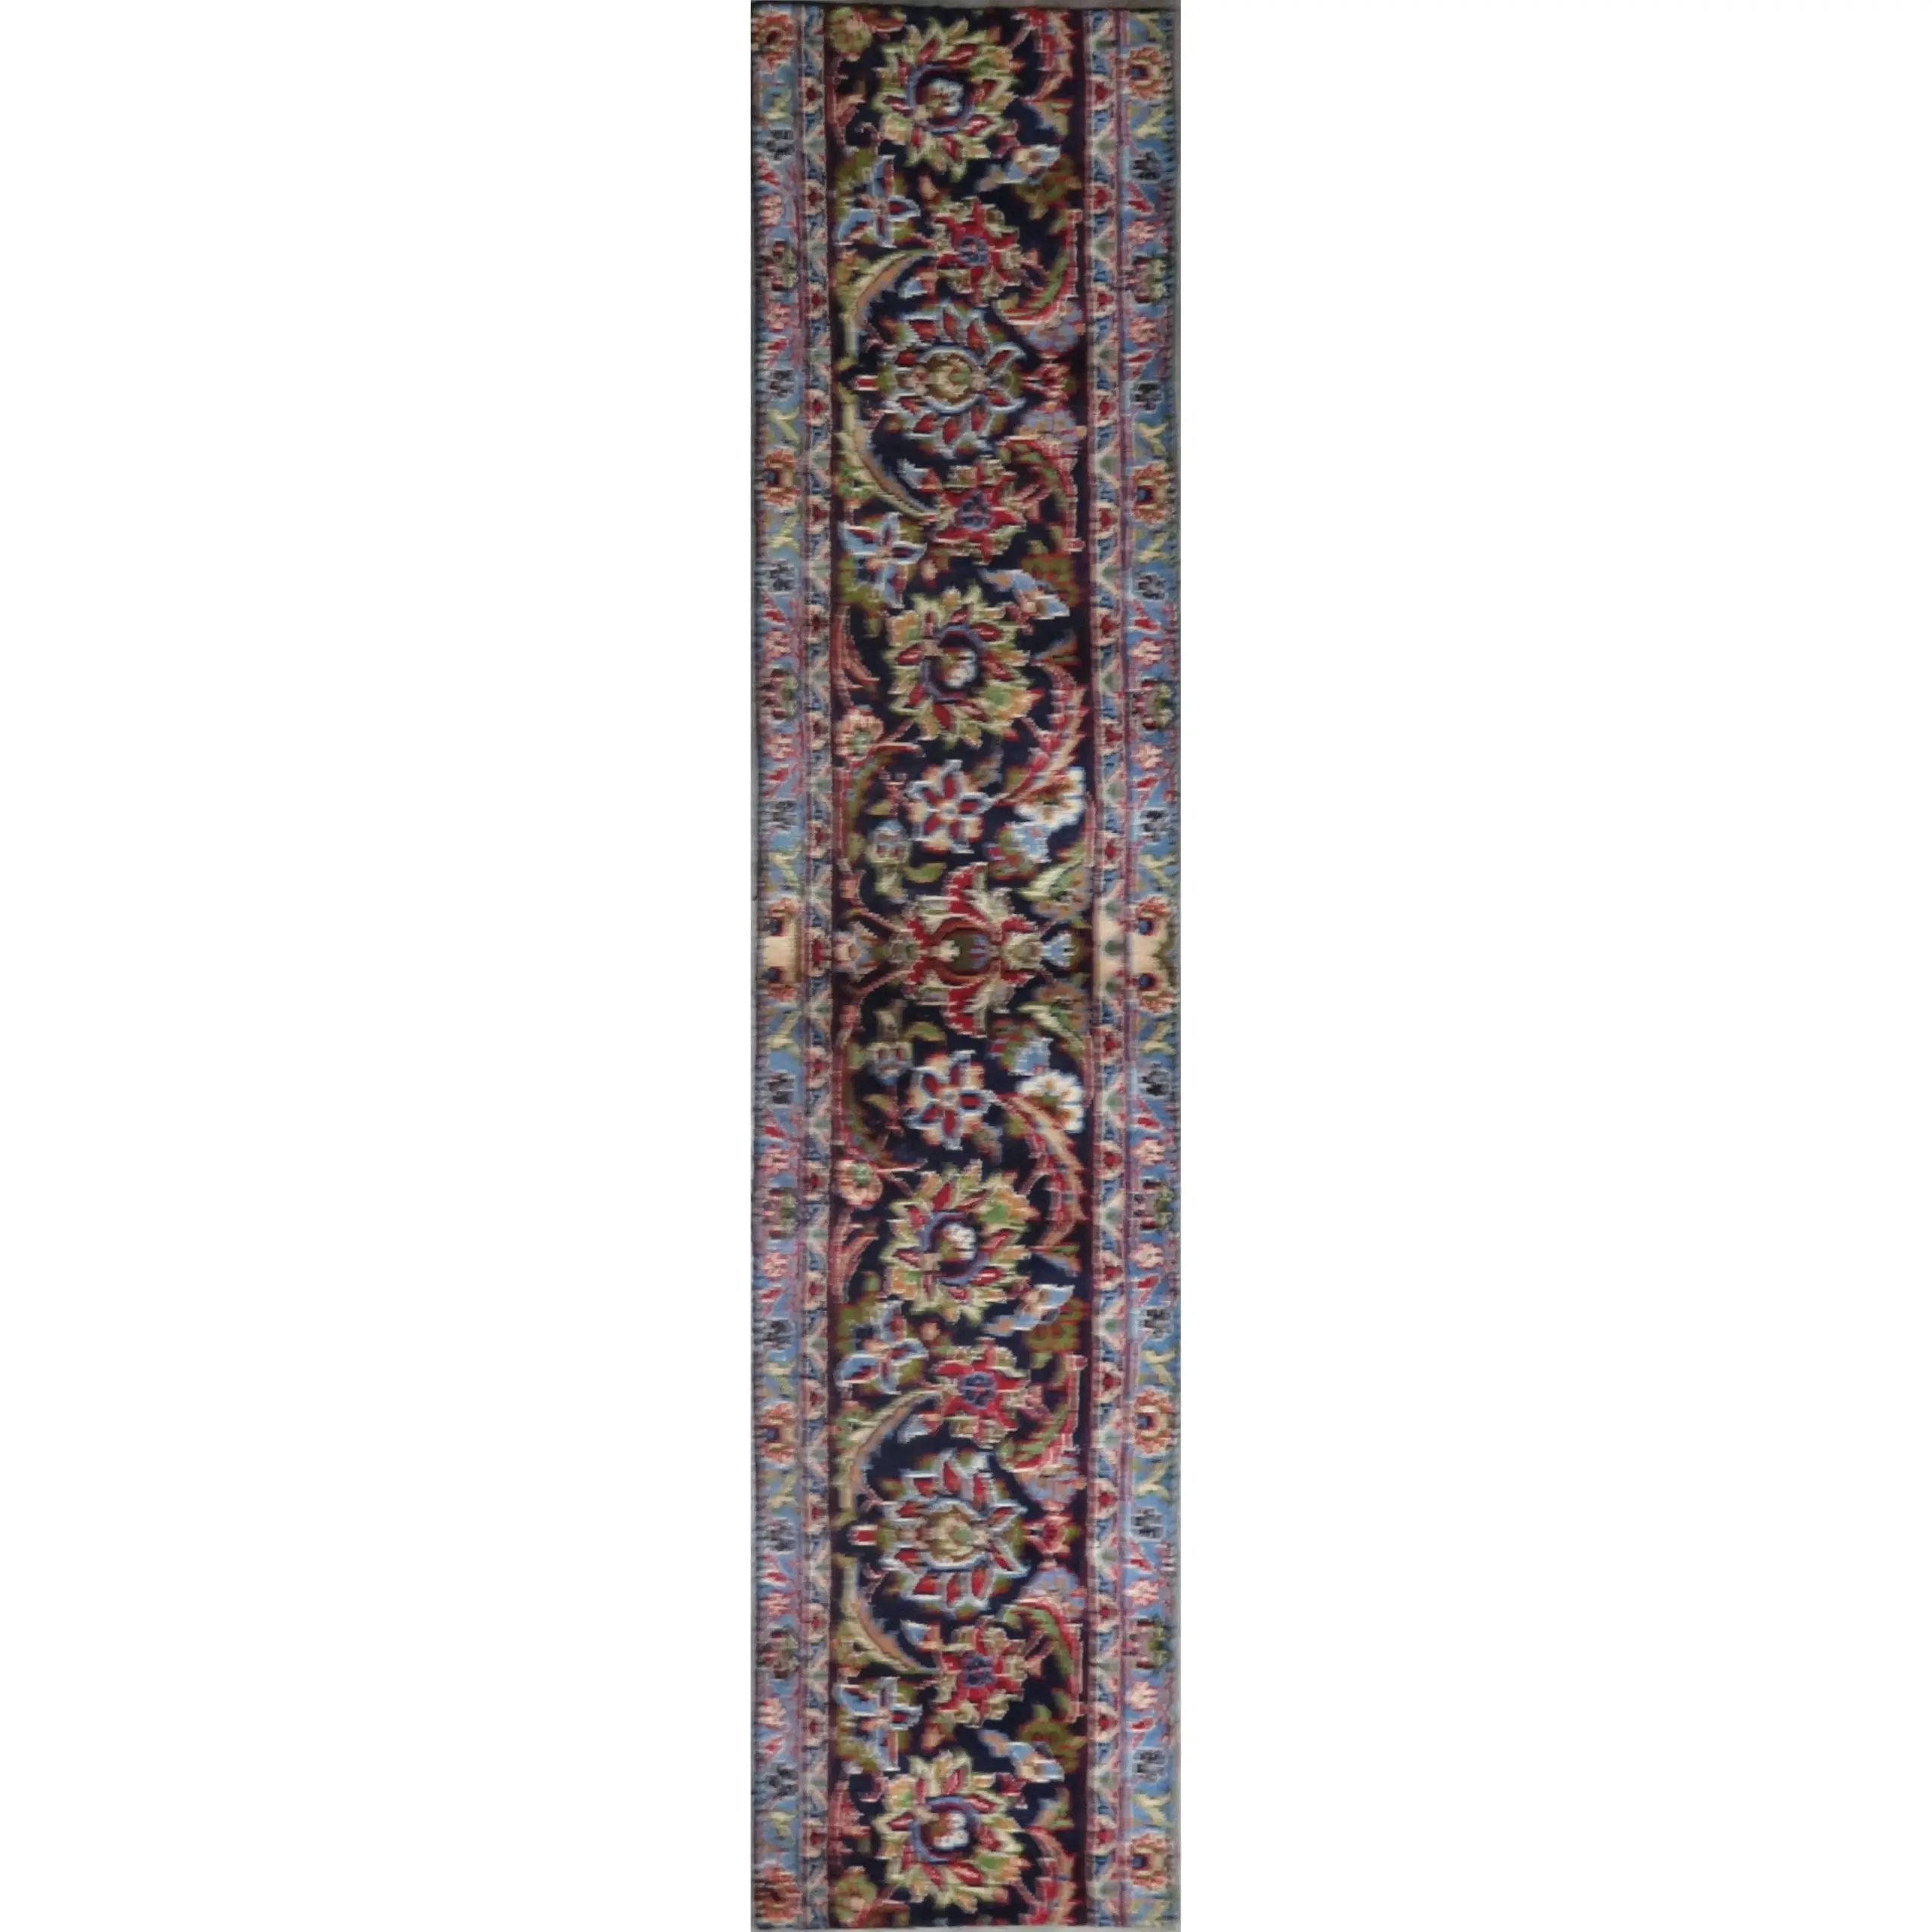 Hand-Knotted Persian Wool Rug _ Luxurious Vintage Design, 6'0" x 1'0", Artisan Crafted